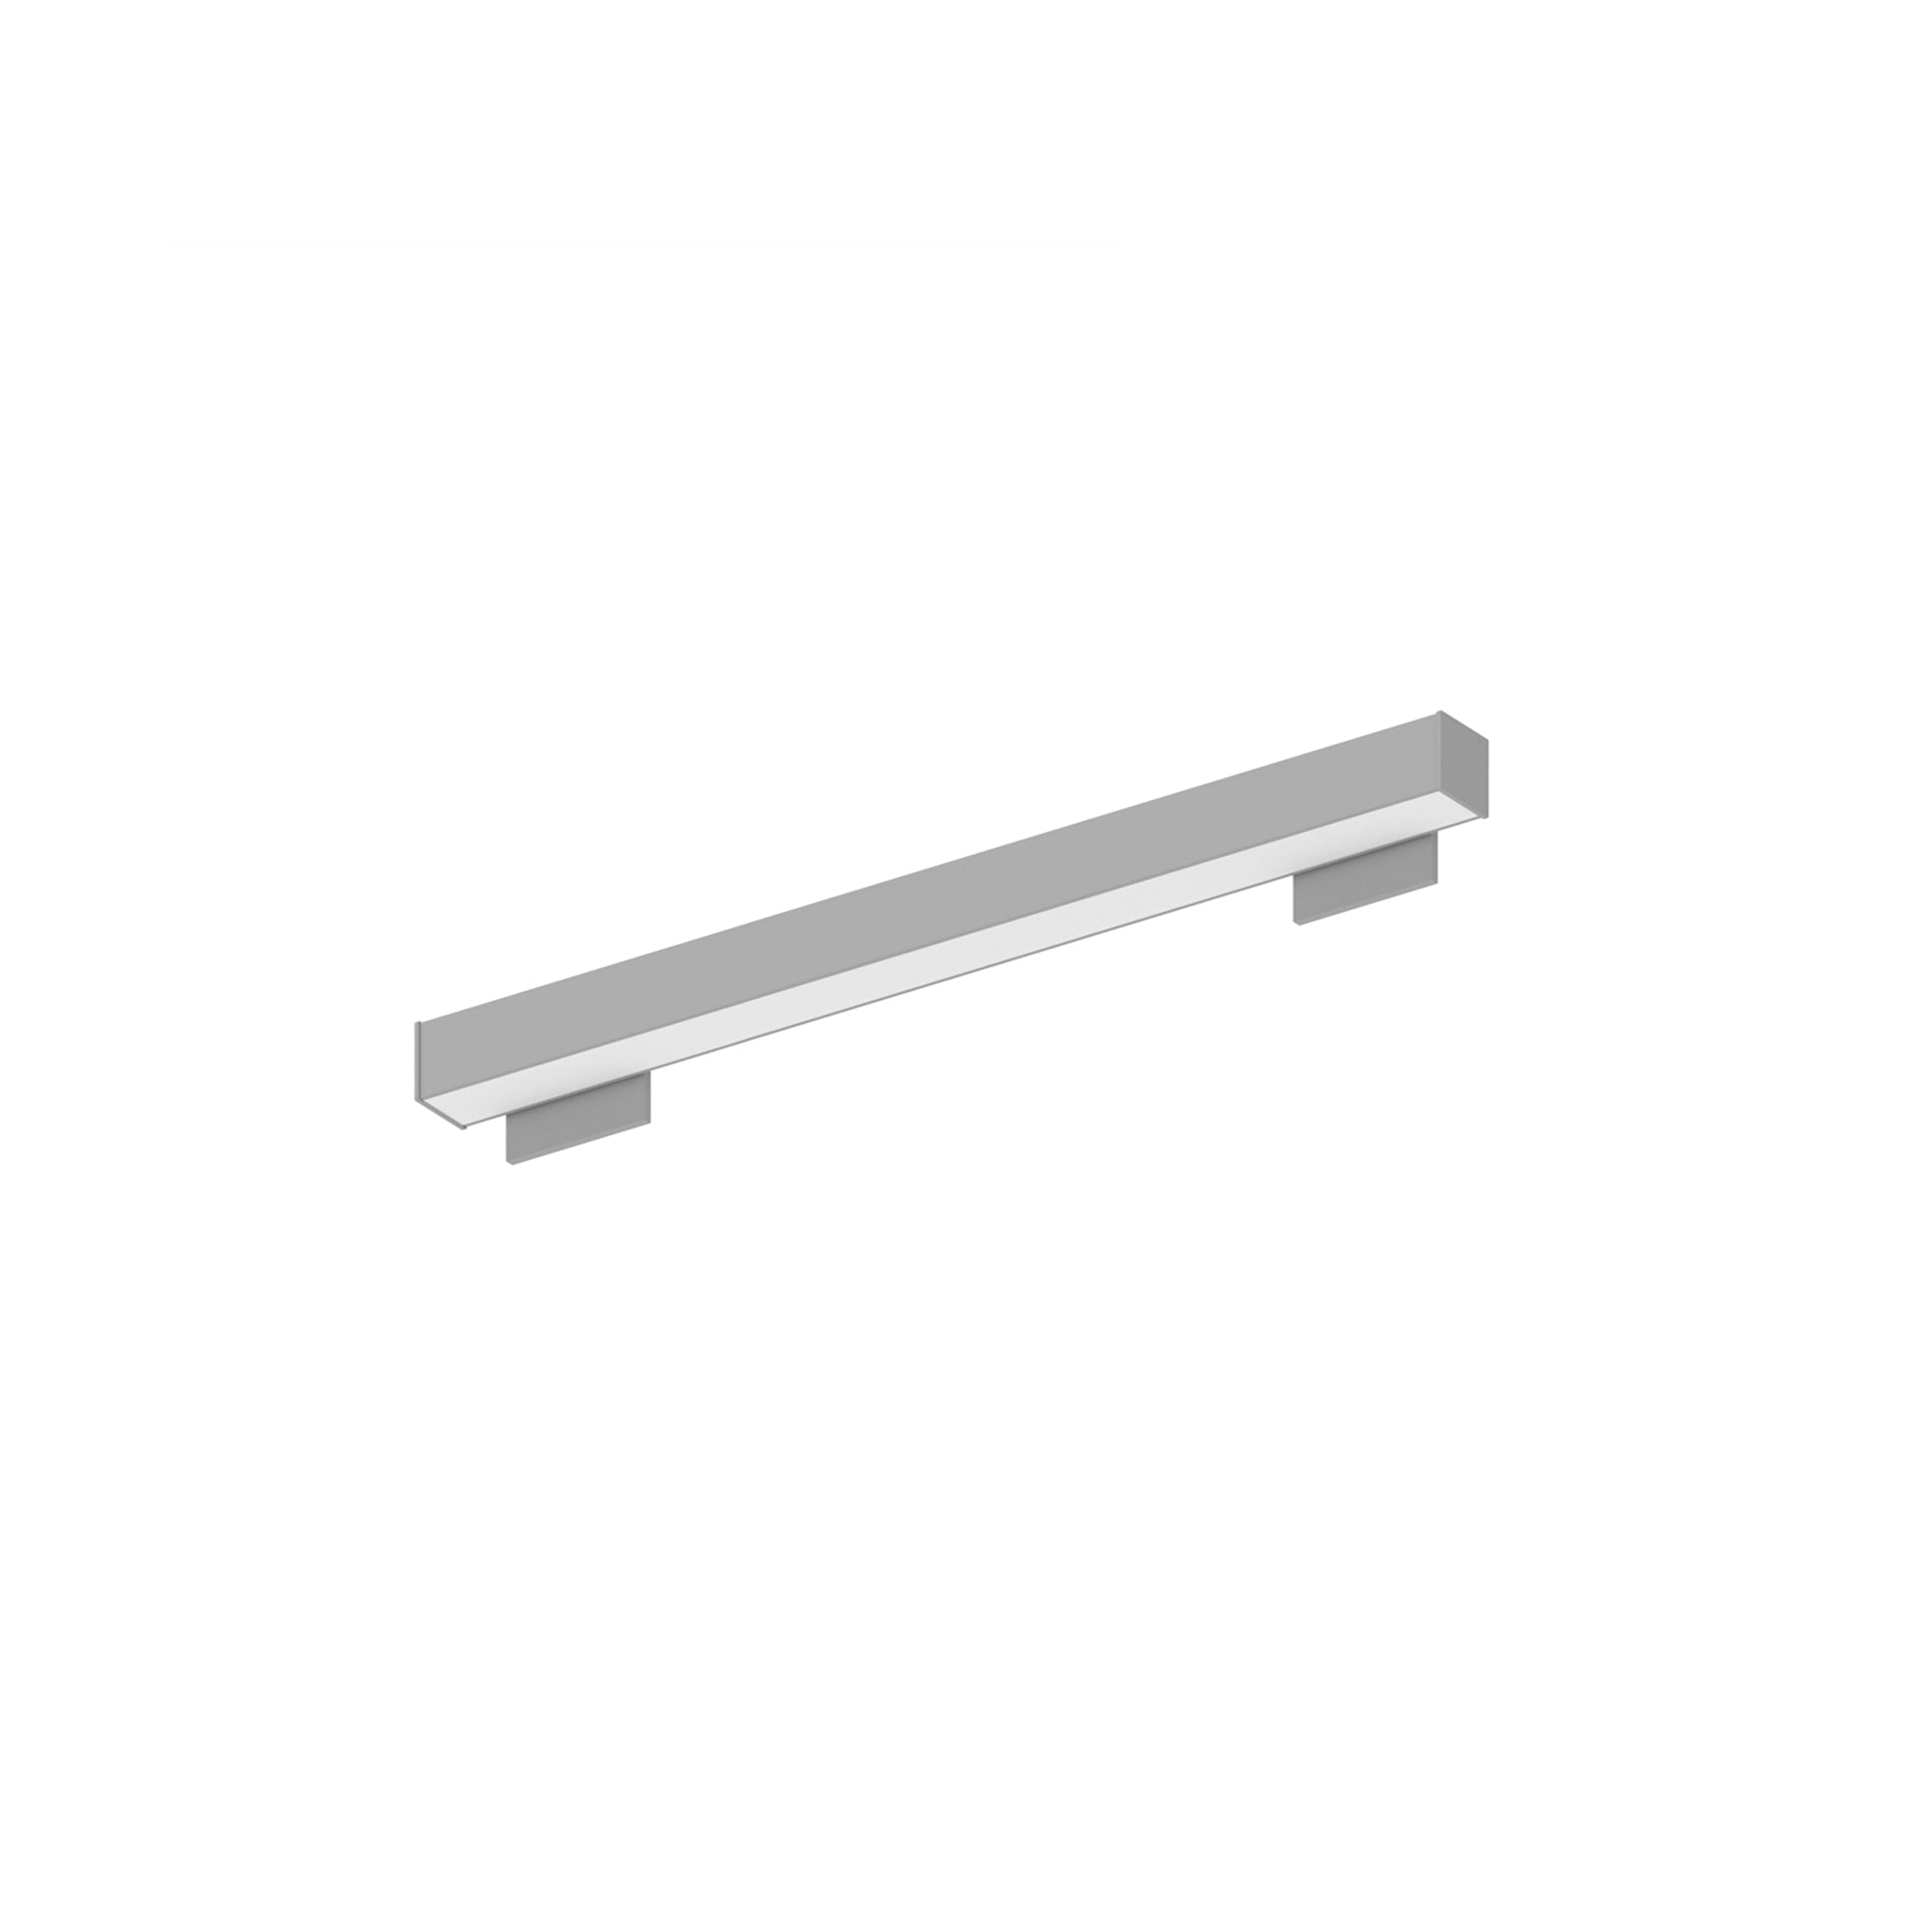 Nora Lighting NWLIN-21035A/L4-R4P - Linear - 2' L-Line LED Wall Mount Linear, 2100lm / 3500K, 4 Inchx4 Inch Left Plate & 4 Inchx4 Inch Right Plate, Right Power Feed, Aluminum Finish